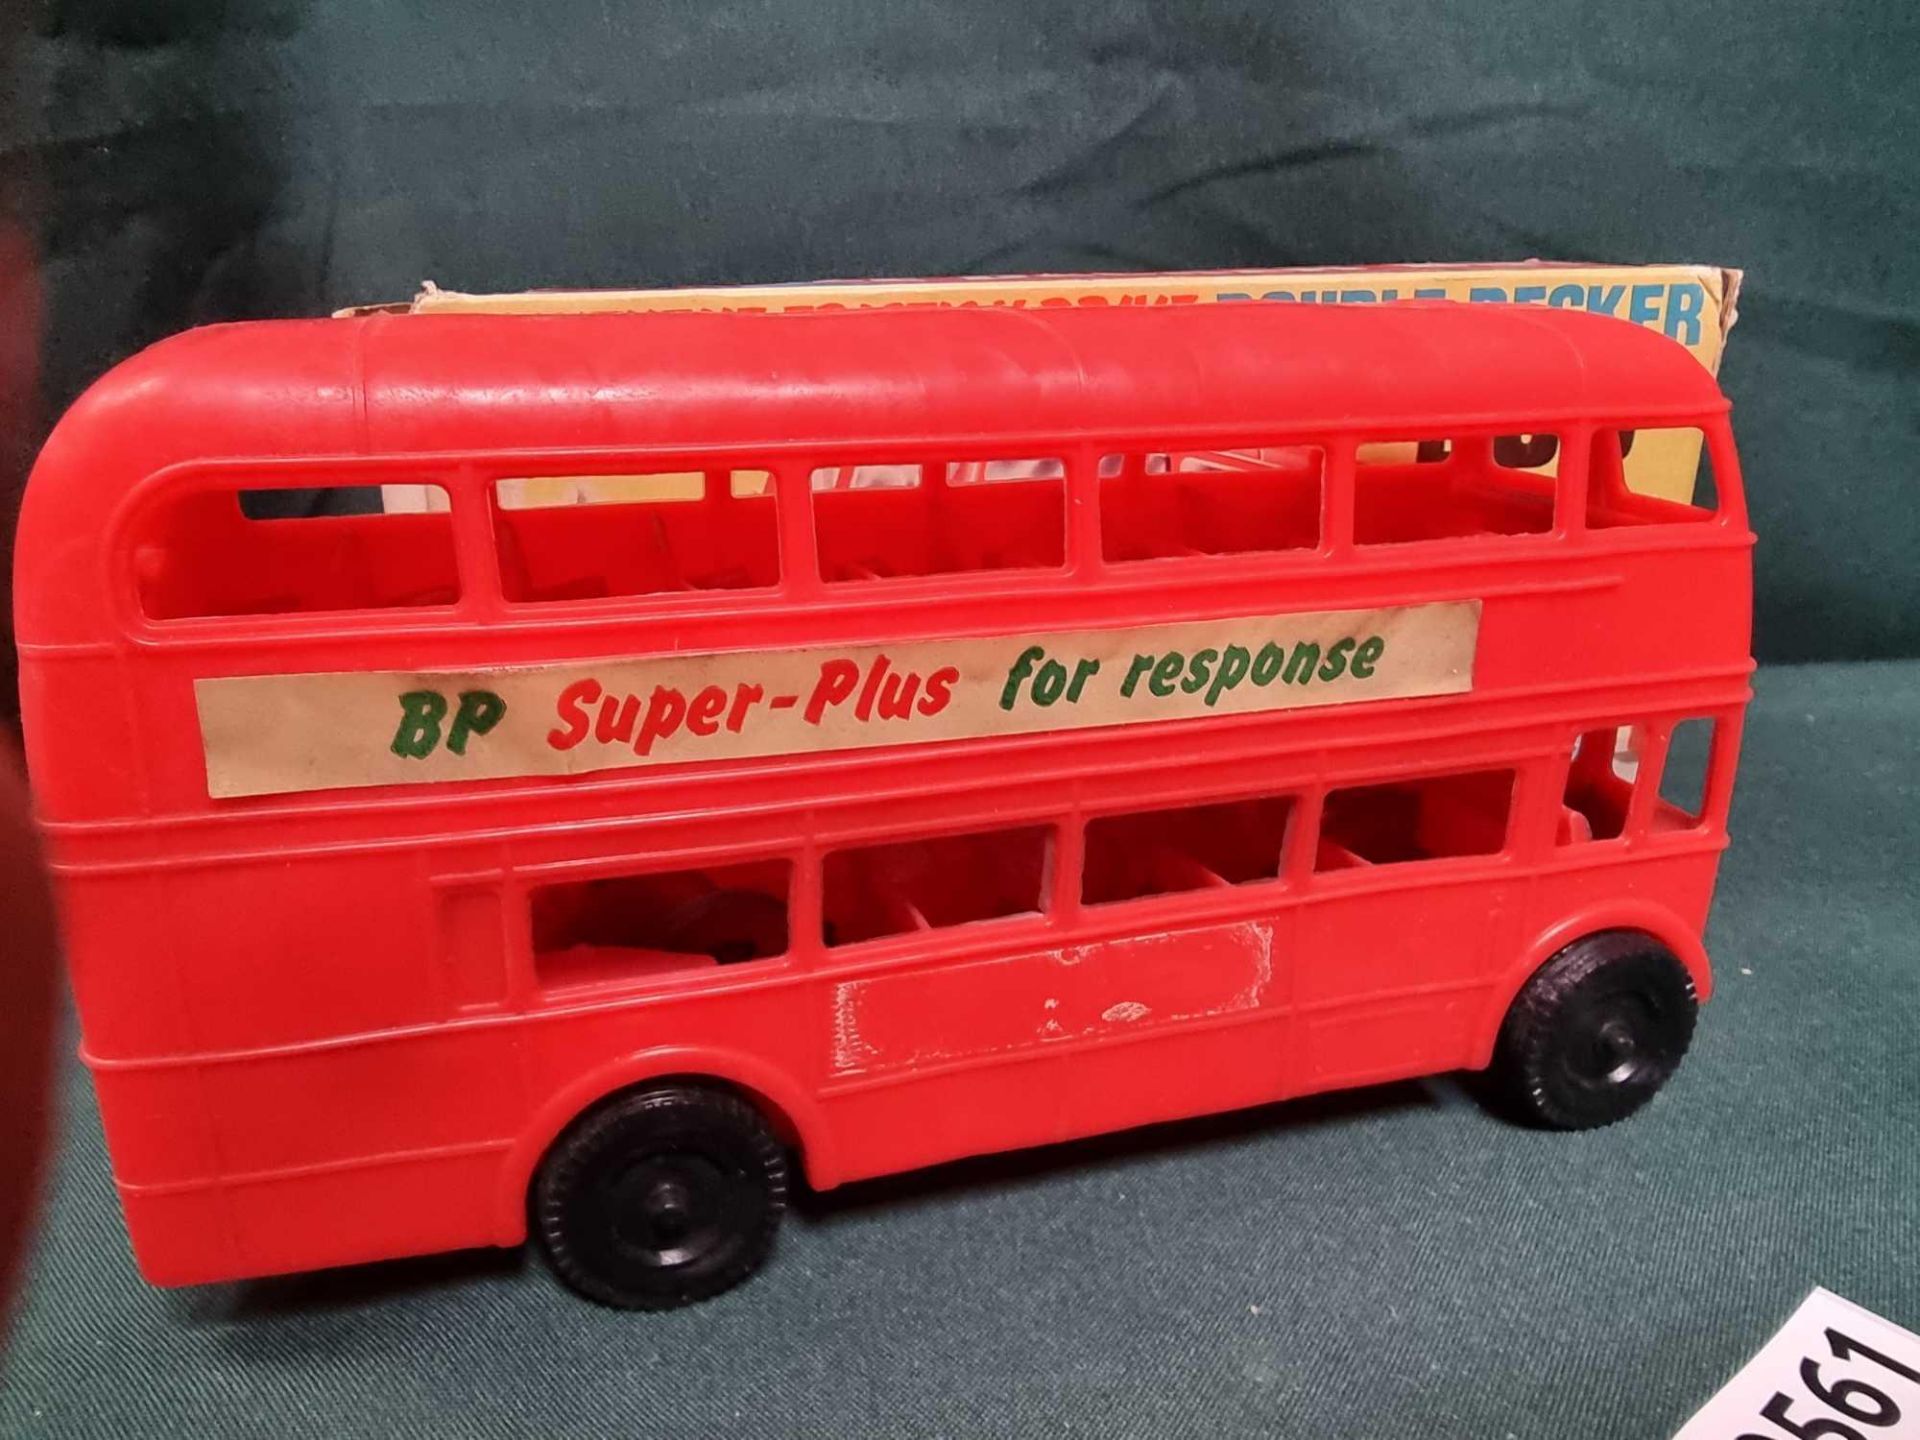 Poplar Plastics Polythene Friction Drive Double Decker Bus In Box Made In England With Original Box - Image 4 of 4